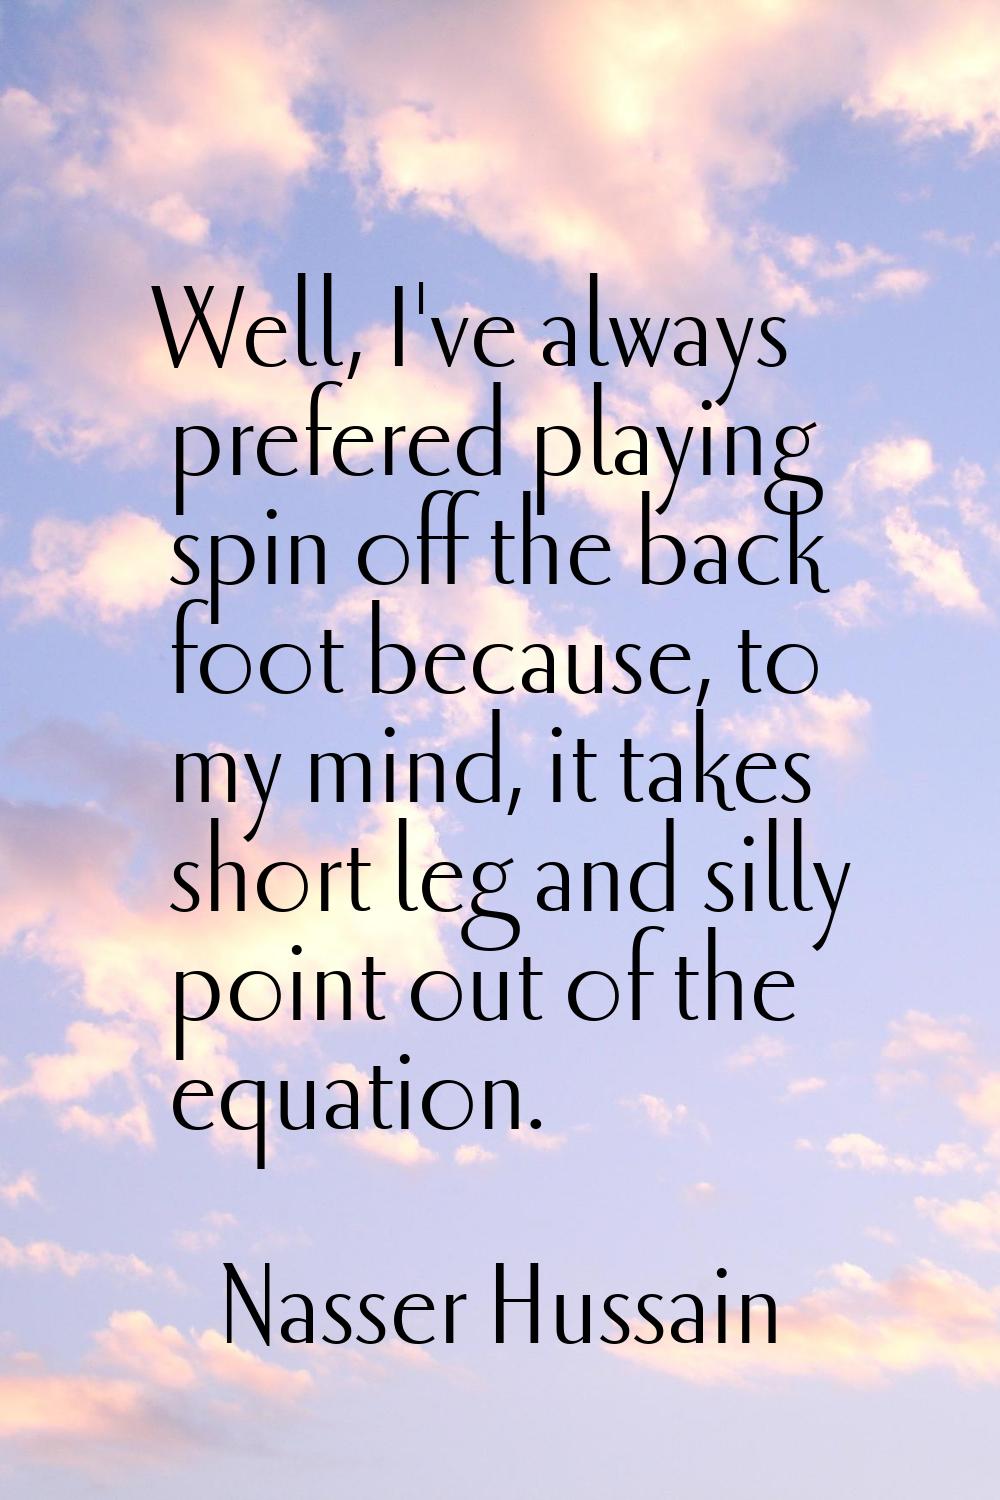 Well, I've always prefered playing spin off the back foot because, to my mind, it takes short leg a